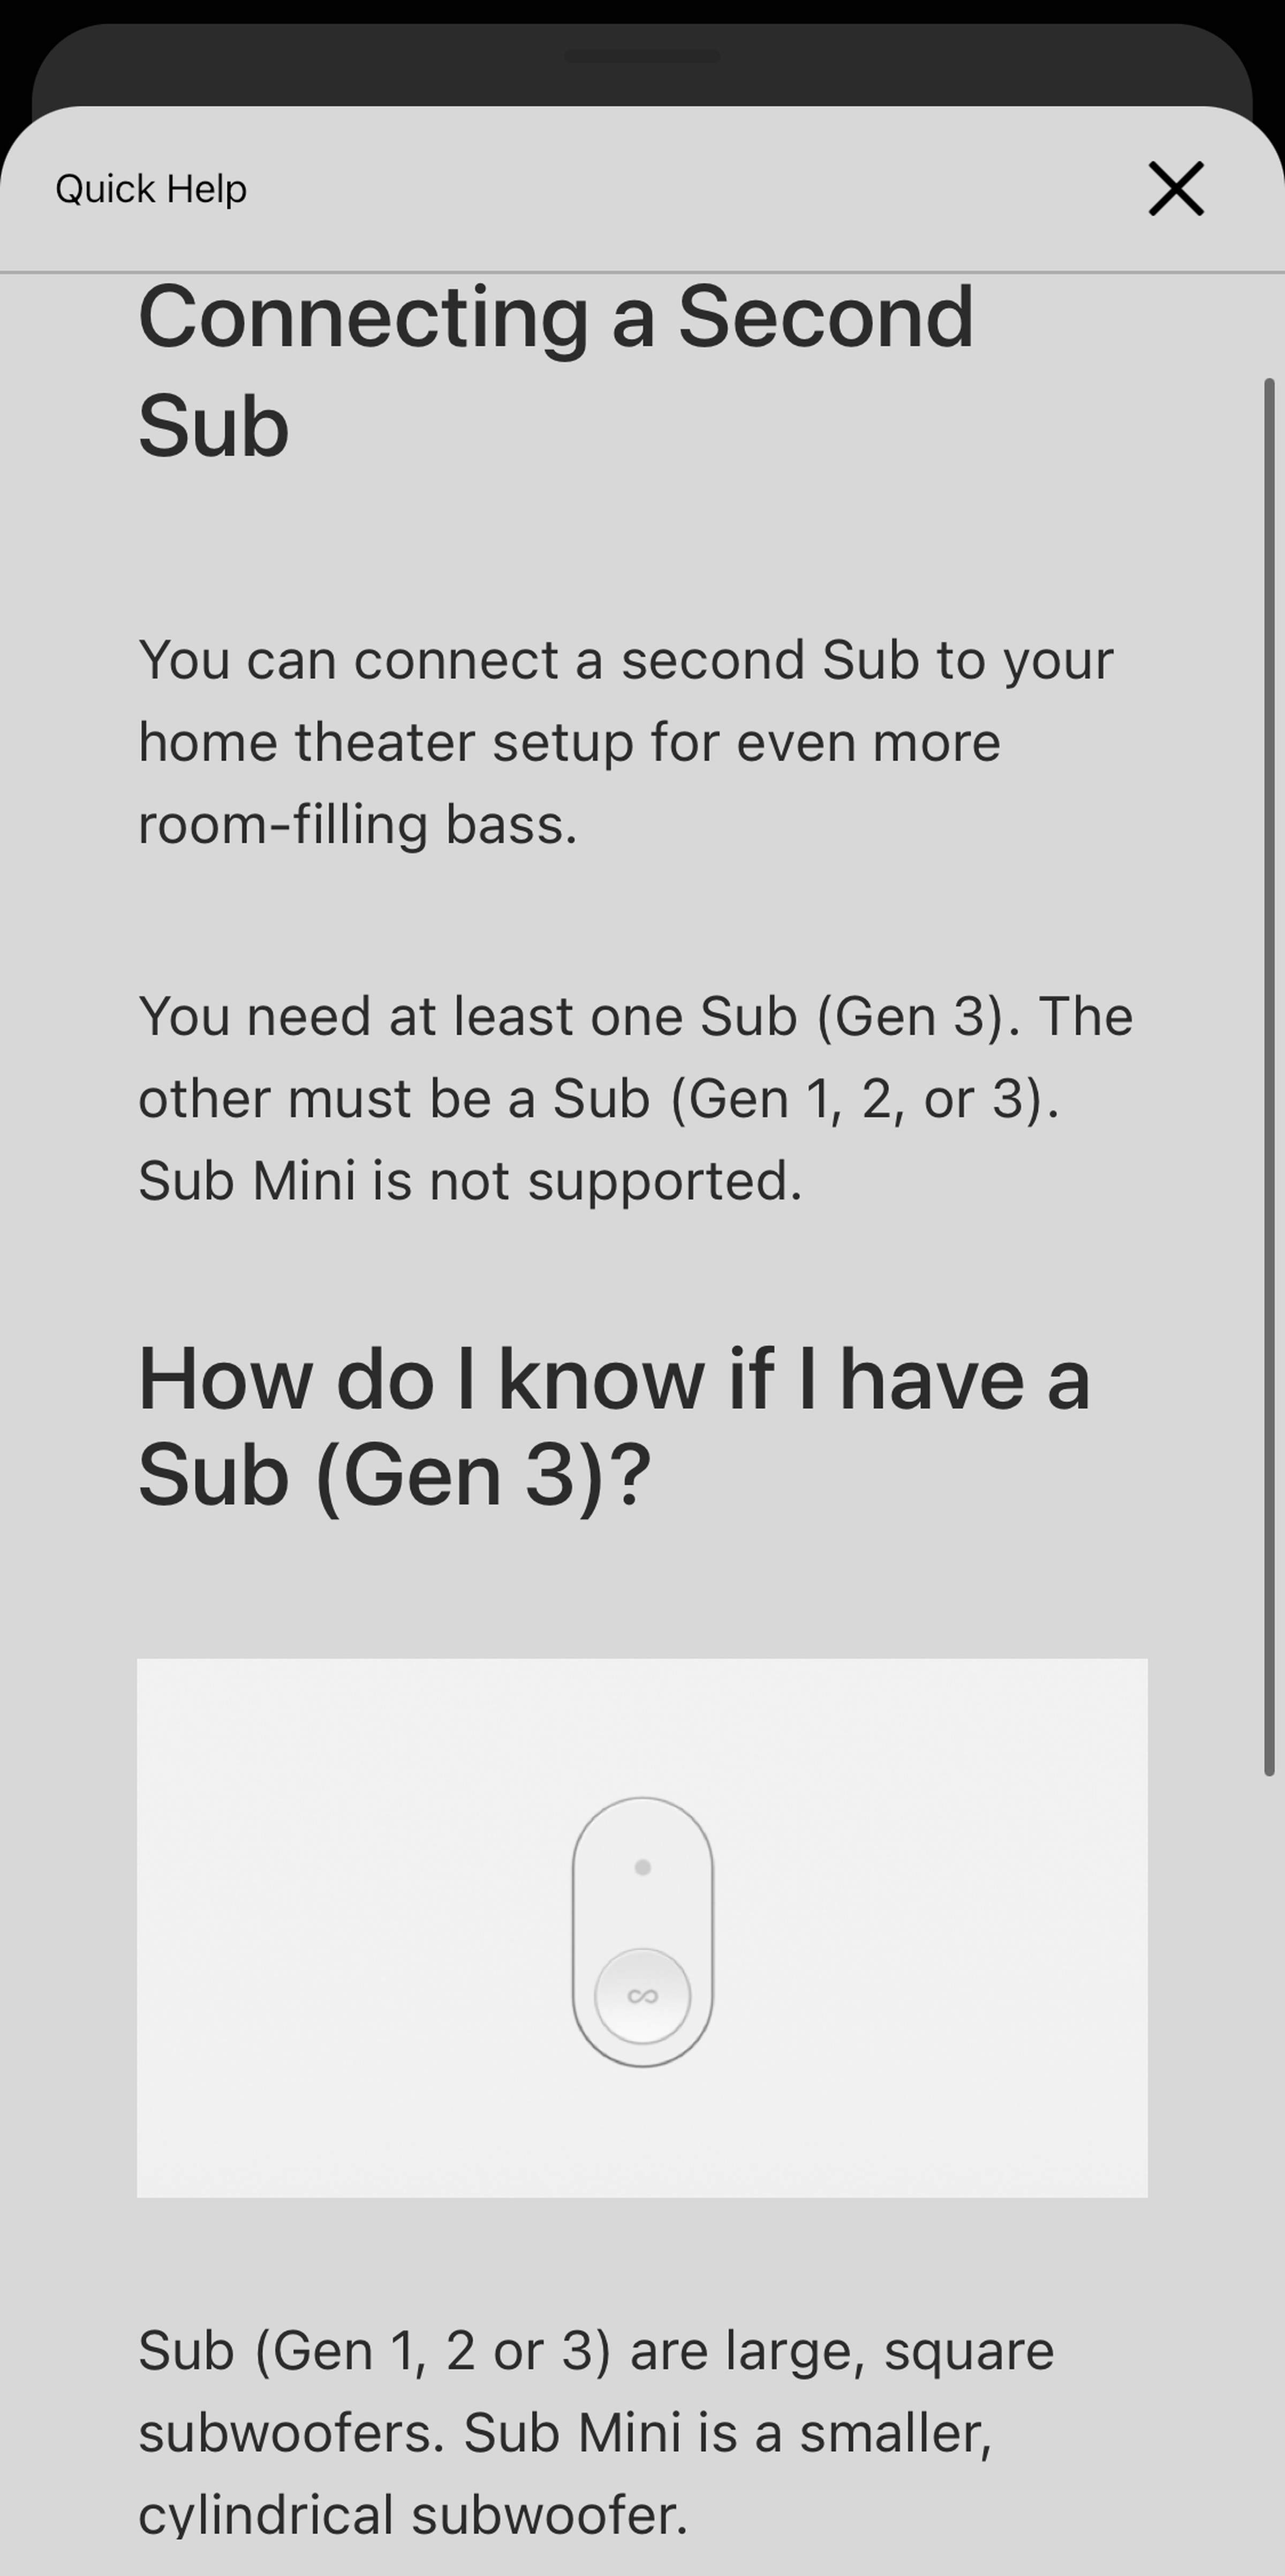 The Sonos iPhone app directly mentions the unannounced Sub Mini.